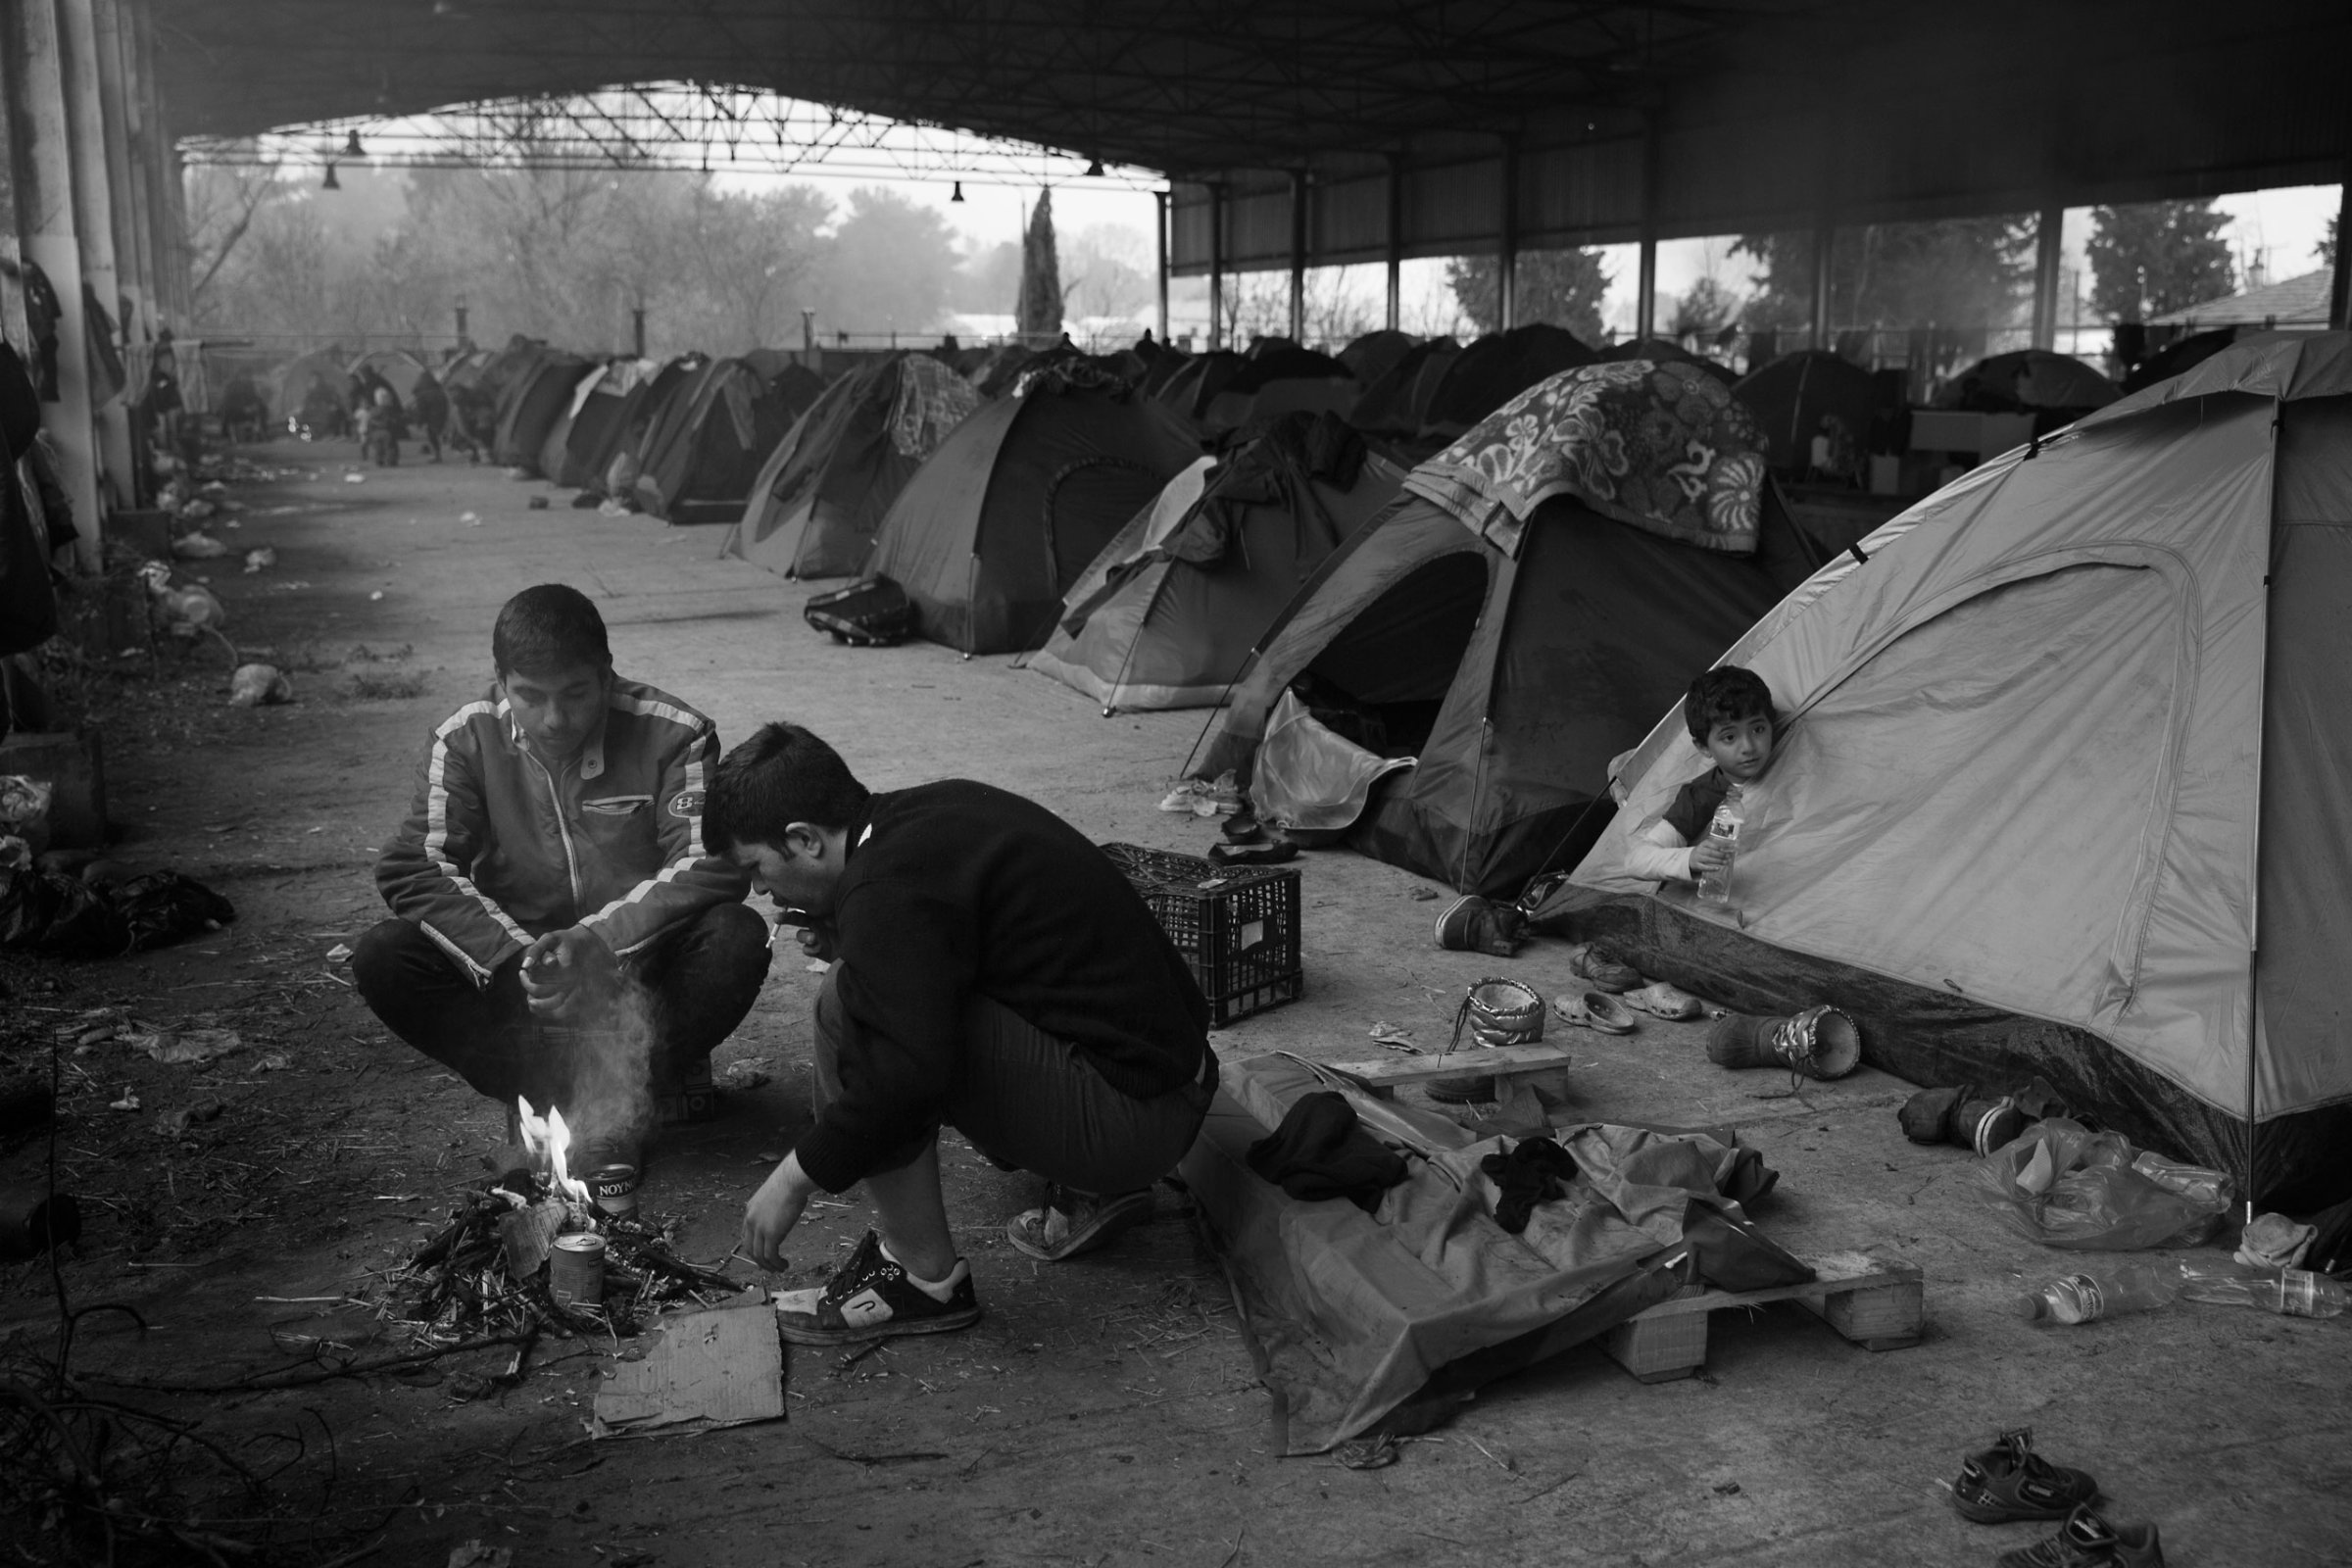 Tents line the inside of an old railway hangar near the town of Idomeni, Greece at the border with Macedonia. The refugees are being stopped from moving beyond Greece leaving thousands stranded in desperate conditions, March 13, 2016.